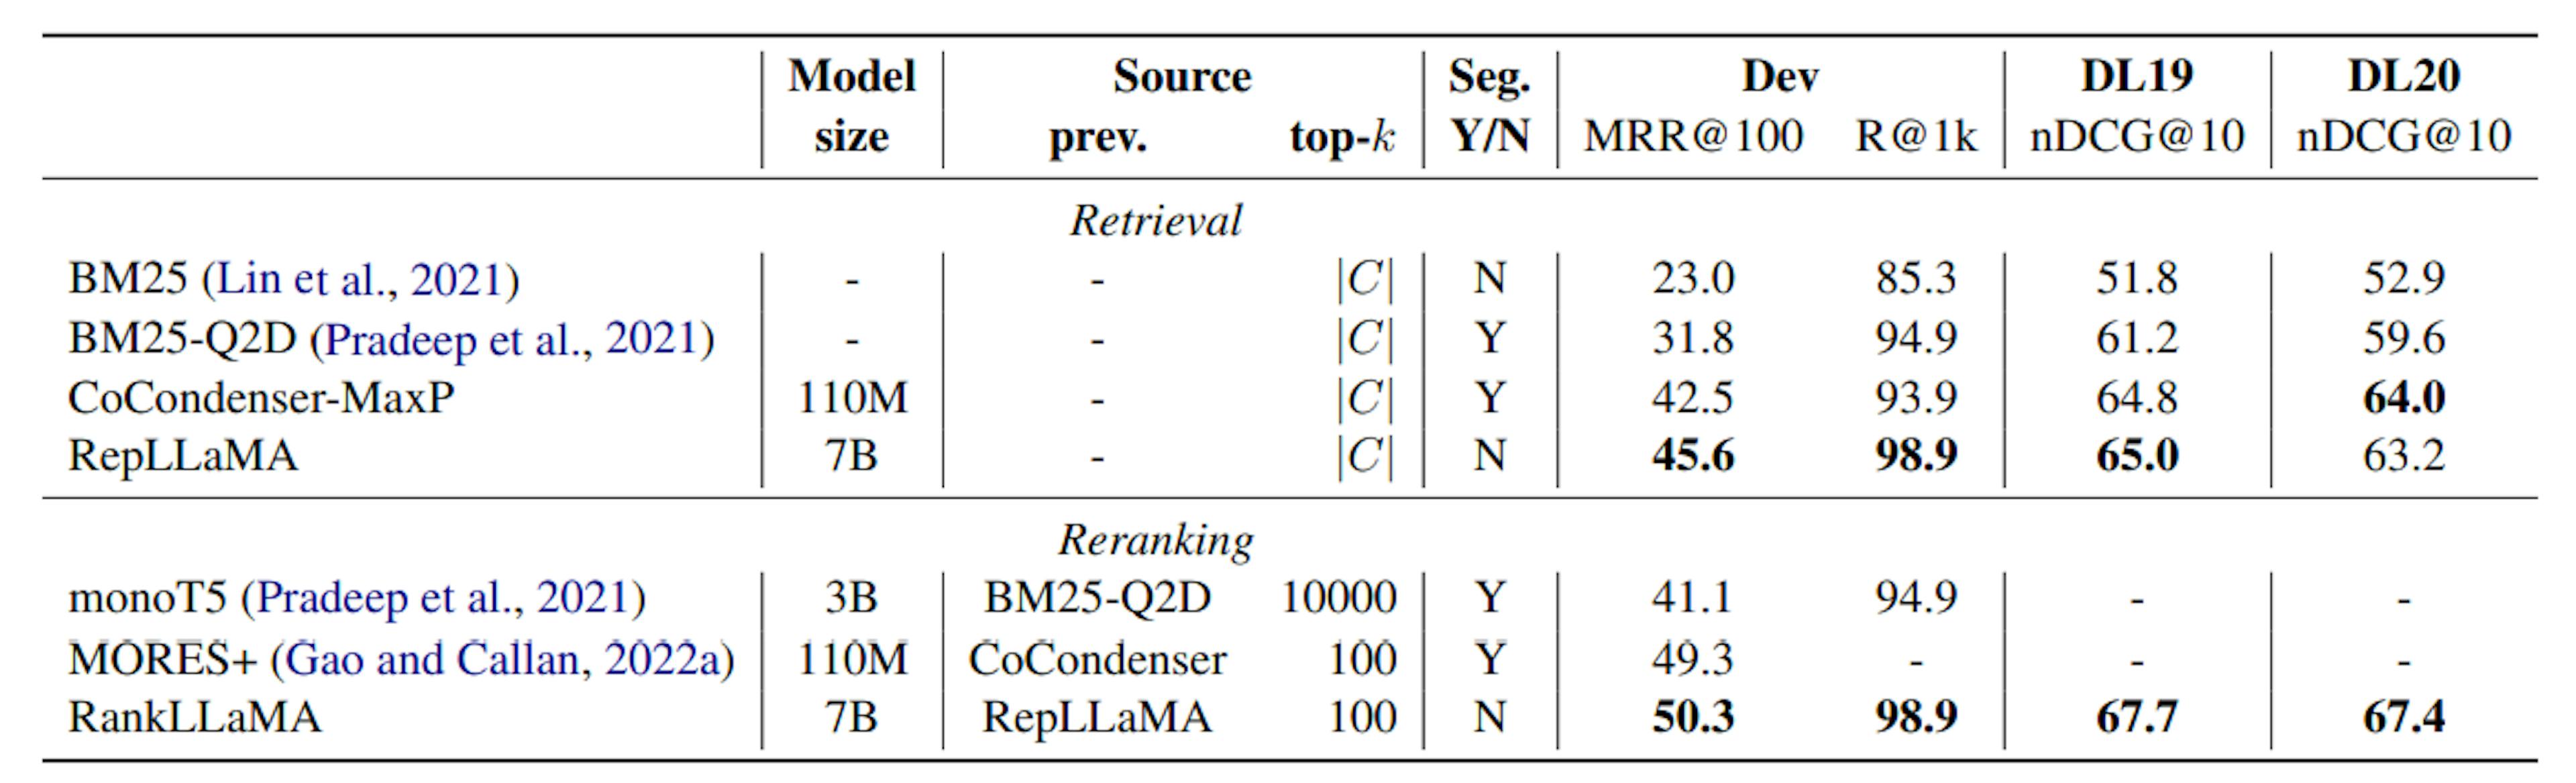 Table 3: The effectiveness of RepLLaMA and RankLLaMA on the MS MARCO document corpus compared to existing methods.